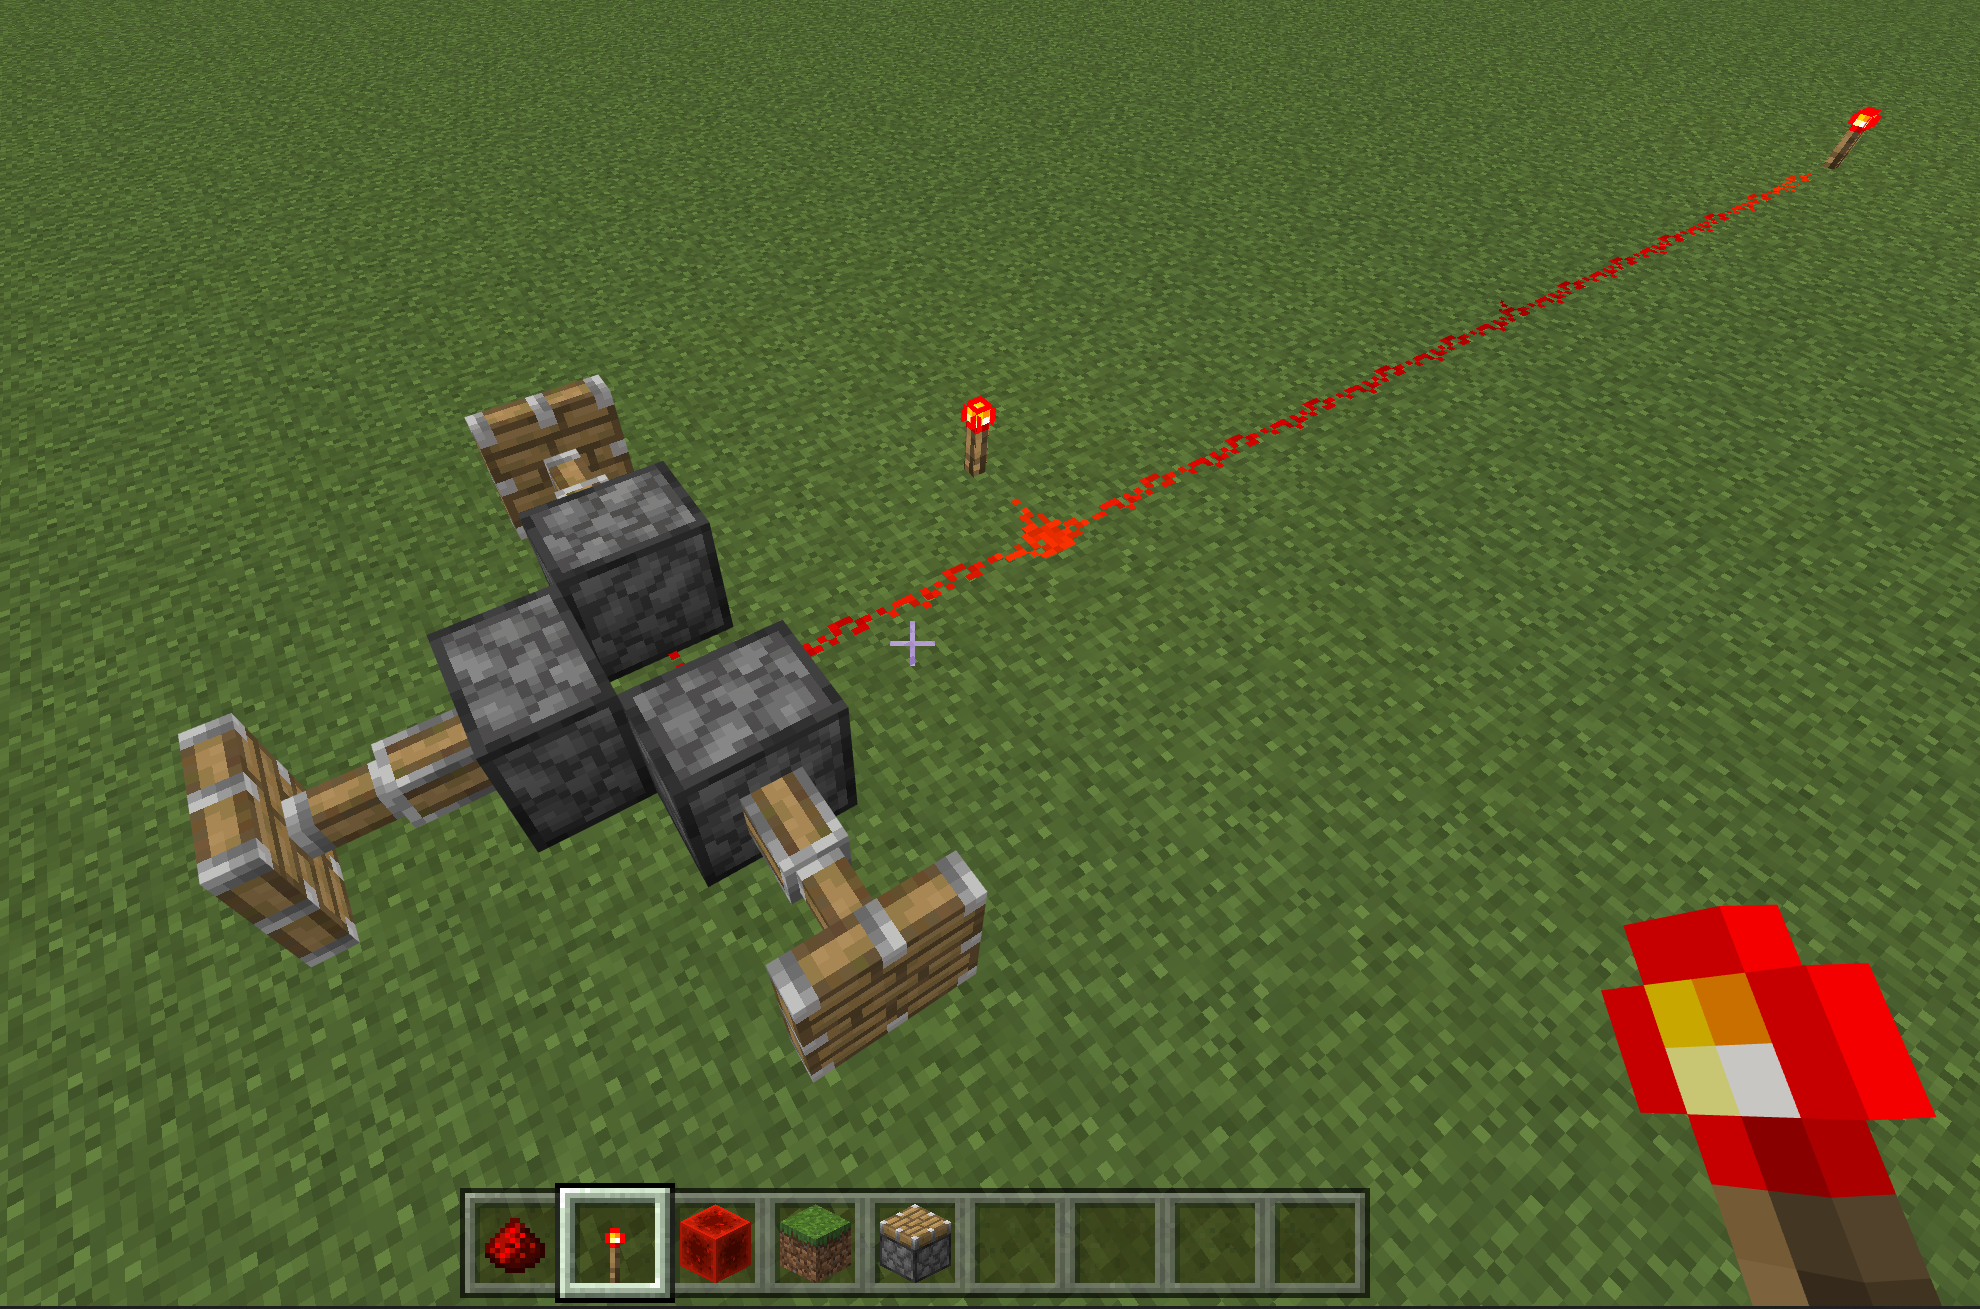 Image of a redstone torch boosting the signal and activating pistons